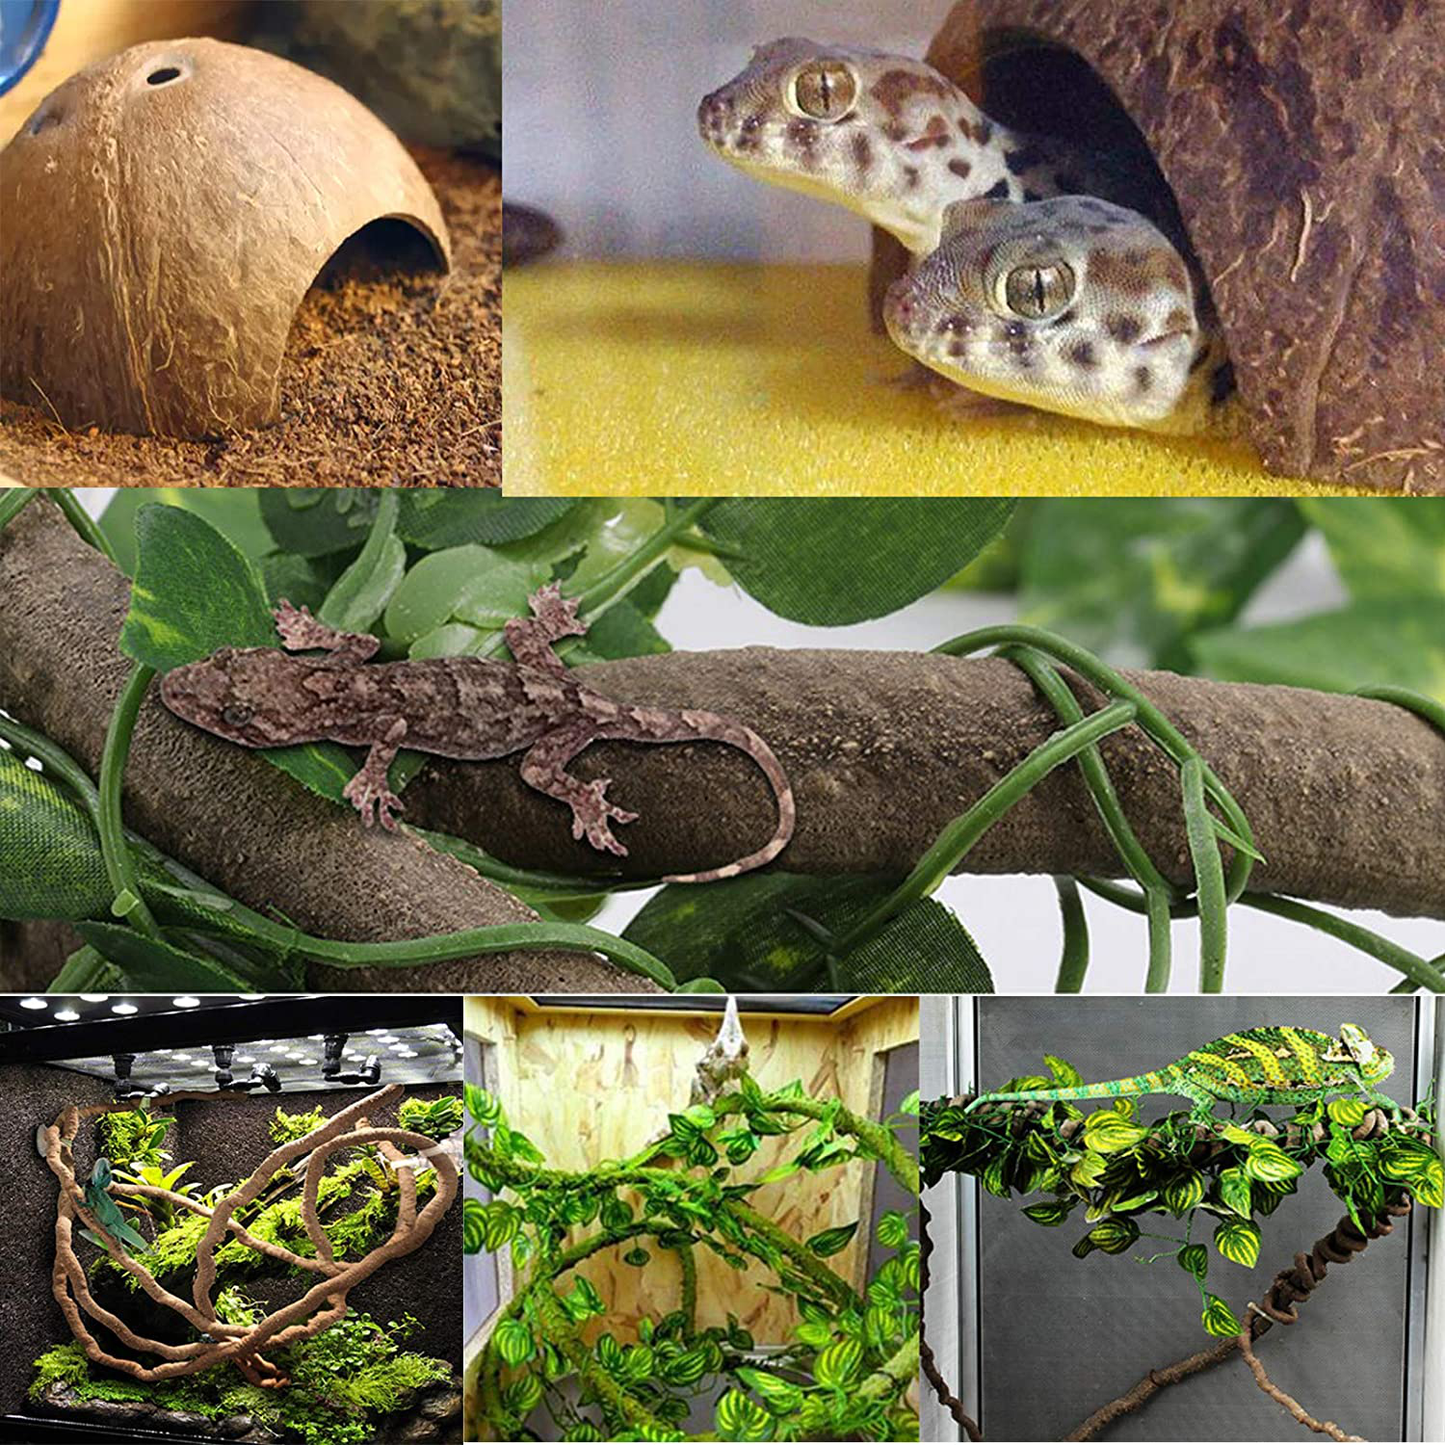 Kathson Leopard Gecko Tank Accessories Reptile Habitat Decor Reptiles Hanging Plants Artificial Bendable Climbing Vines and Hidden Coconut Shell Hole for Chameleon, Lizards, Gecko, Snakes Animals & Pet Supplies > Pet Supplies > Small Animal Supplies > Small Animal Habitat Accessories kathson   